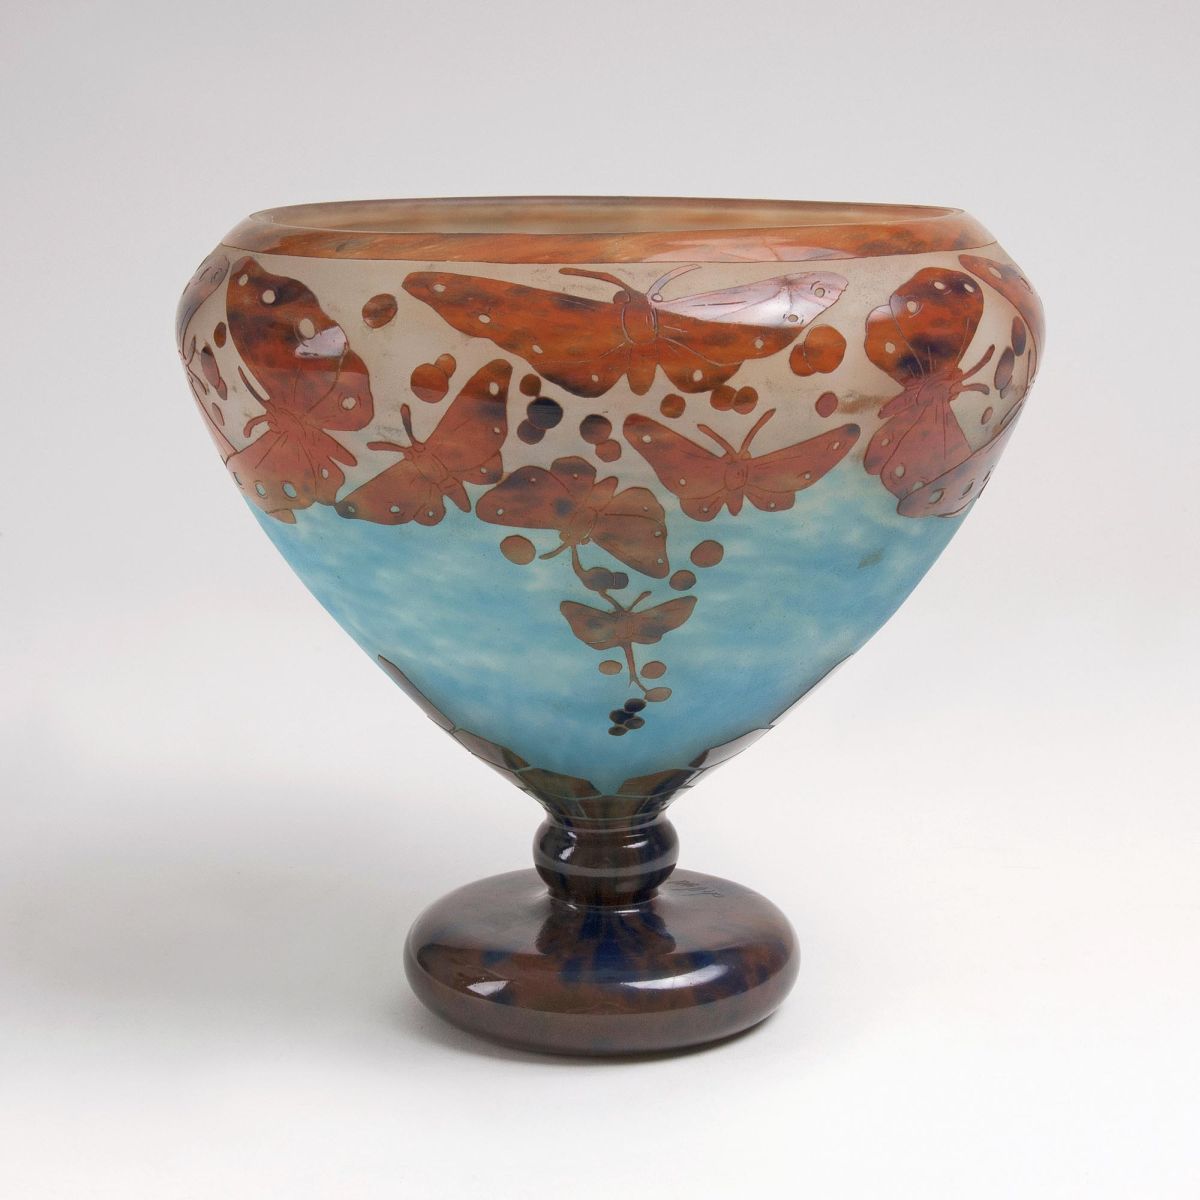 A Large Footed Bowl with Butterflies